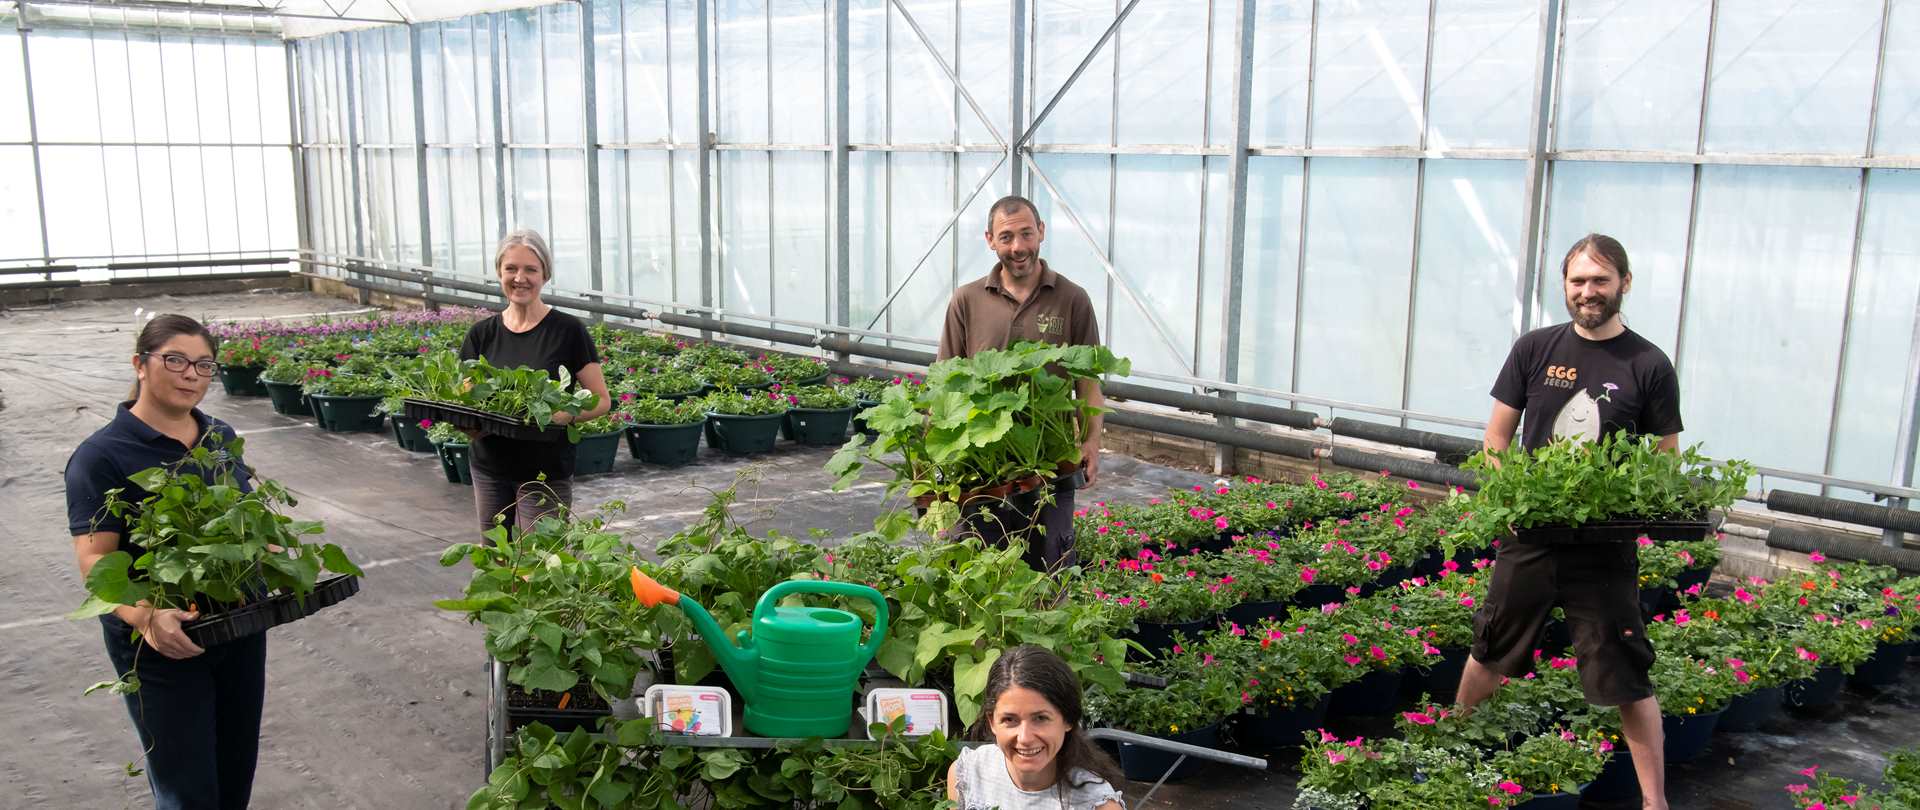 A group of men and women holding plants in pots and smiling from a social distance